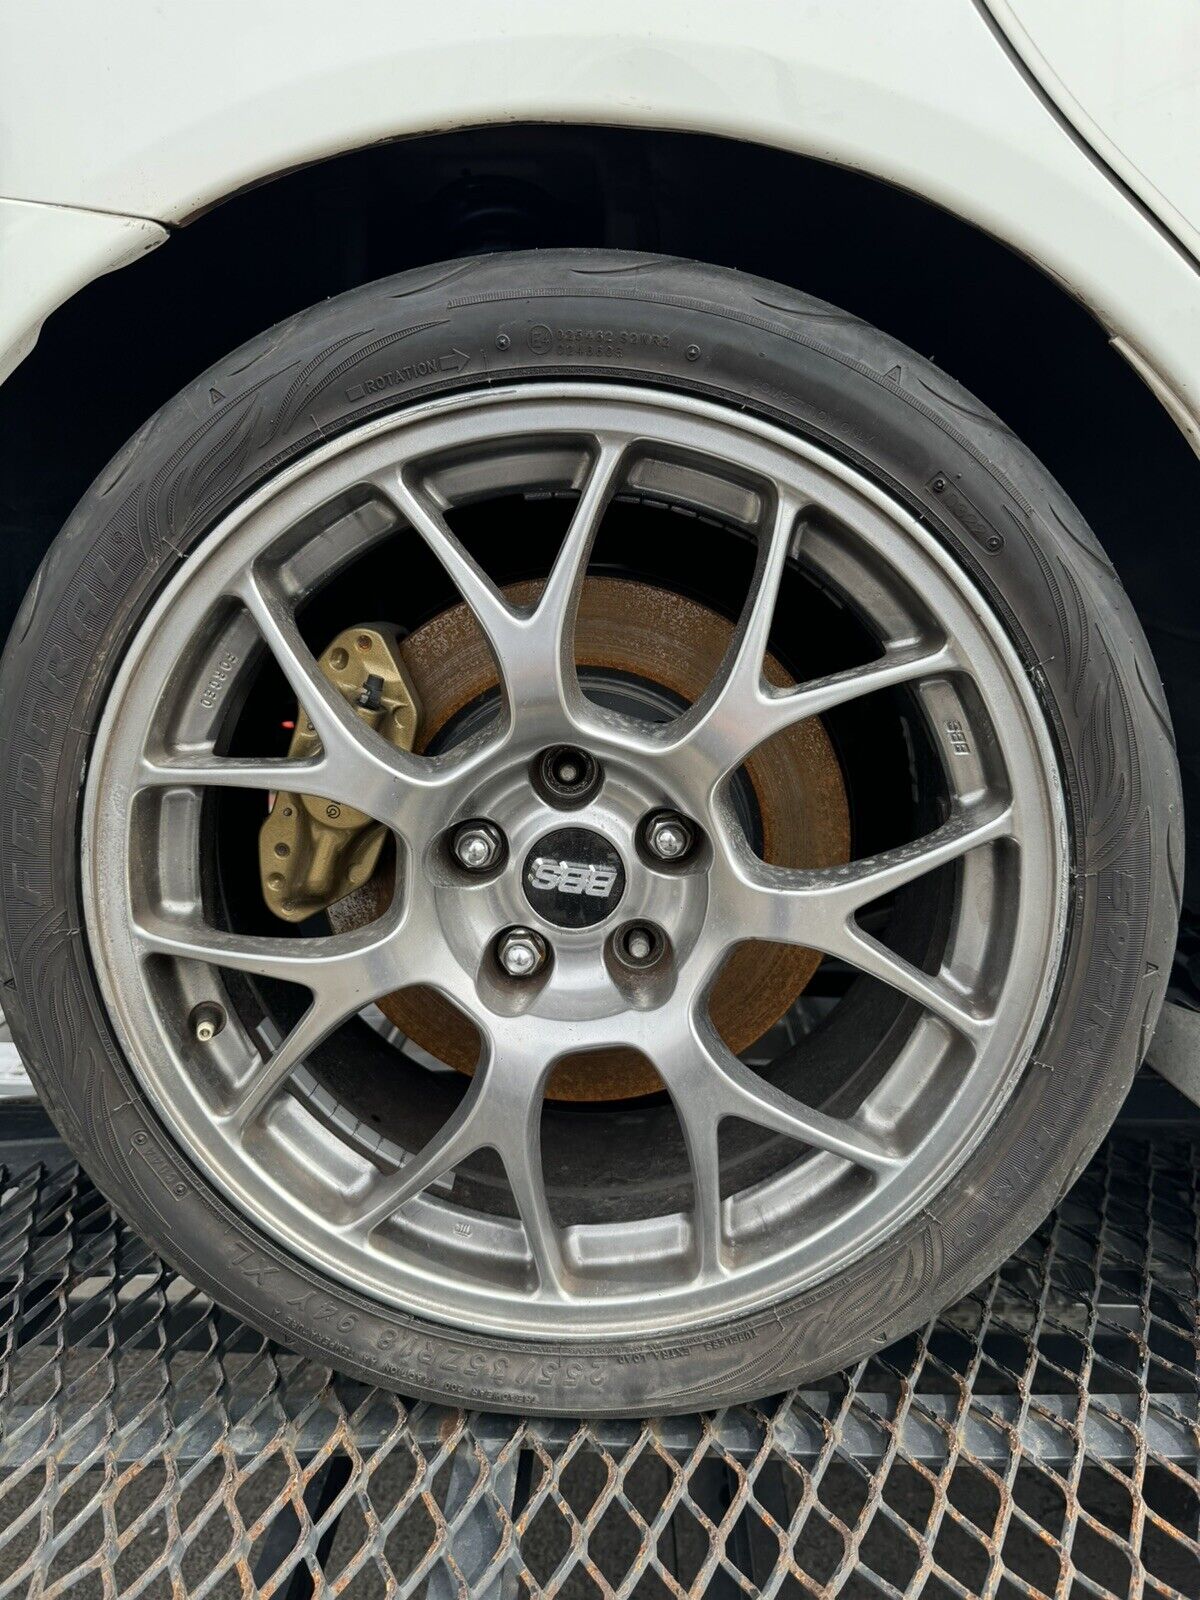 MITSUBISHI Genuine Lancer EVO 10 （CZ4A） Aluminum wheels (made by BBS) From Japan